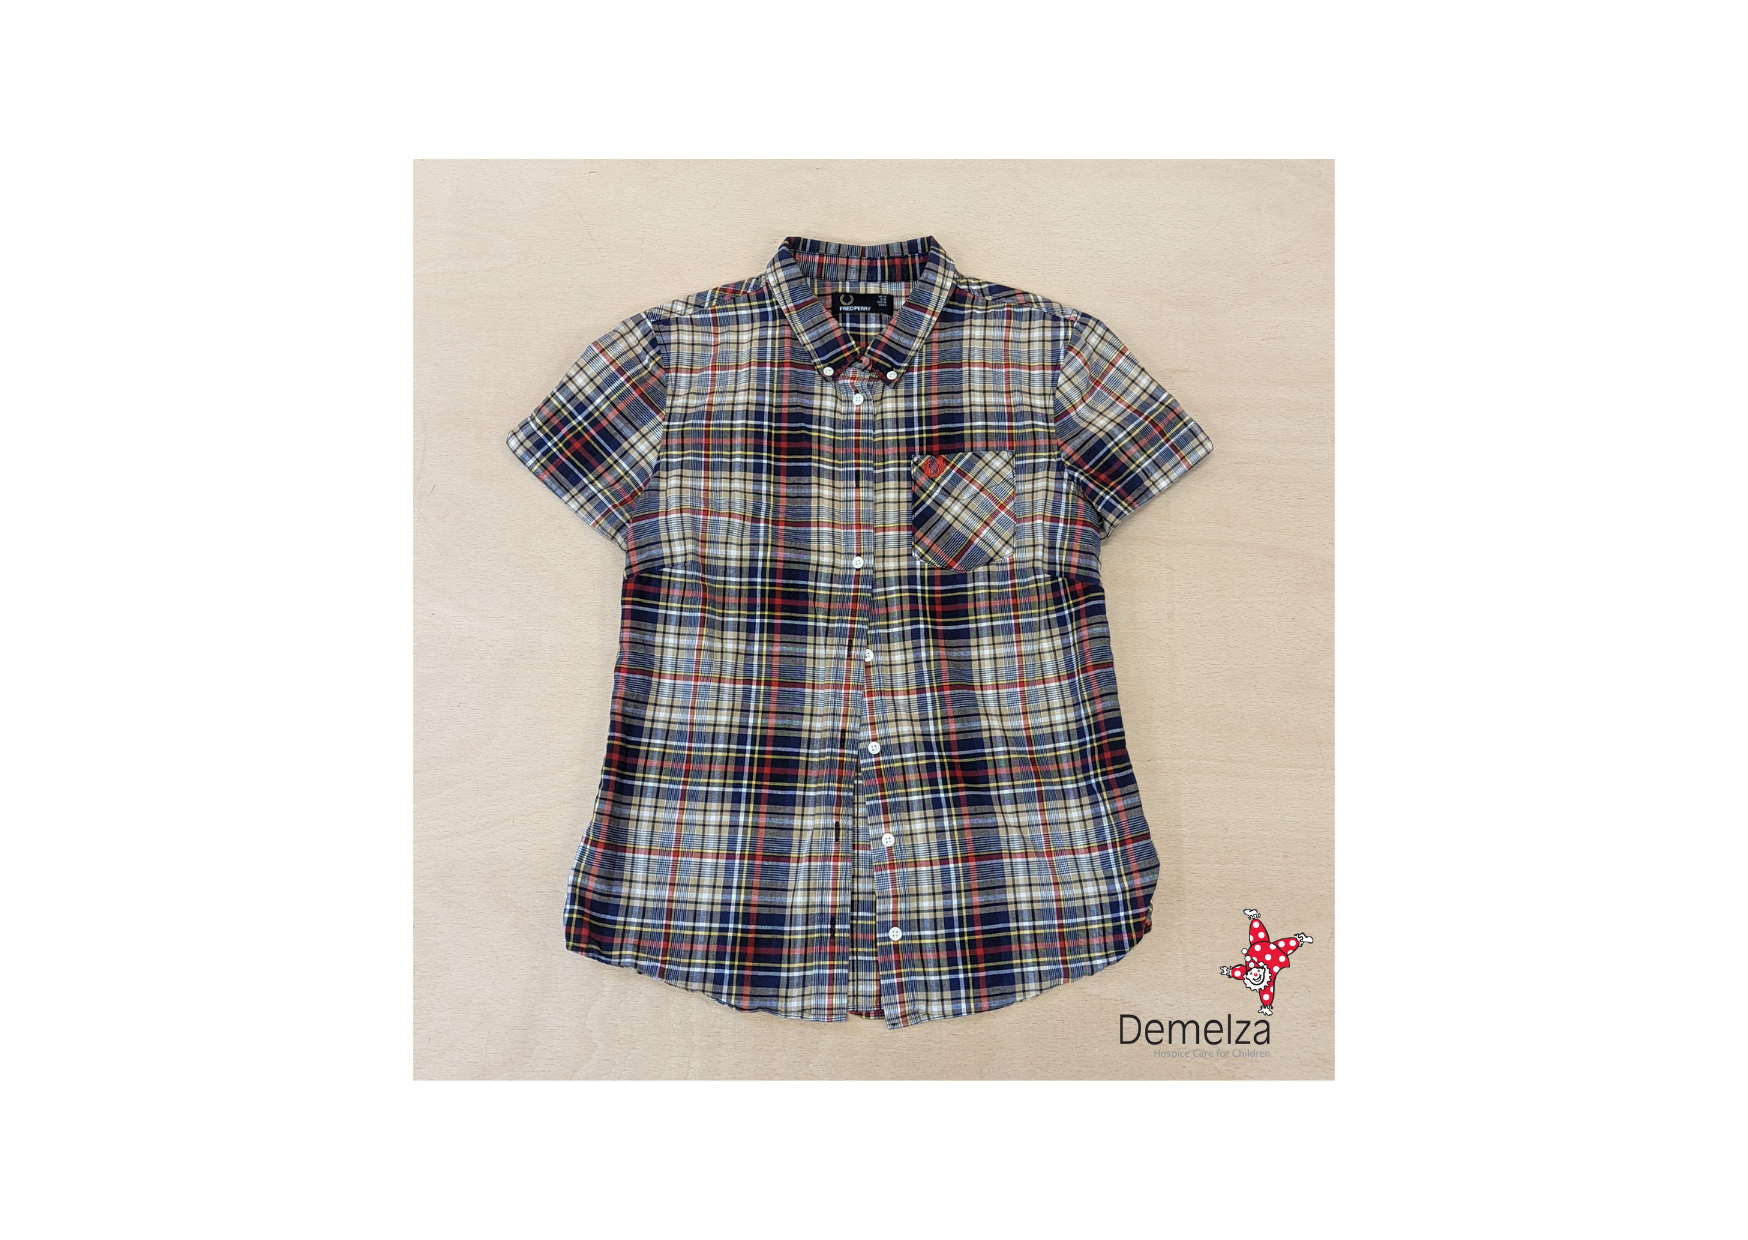 Short sleeved semi fitted shirt in small blue, red and green check